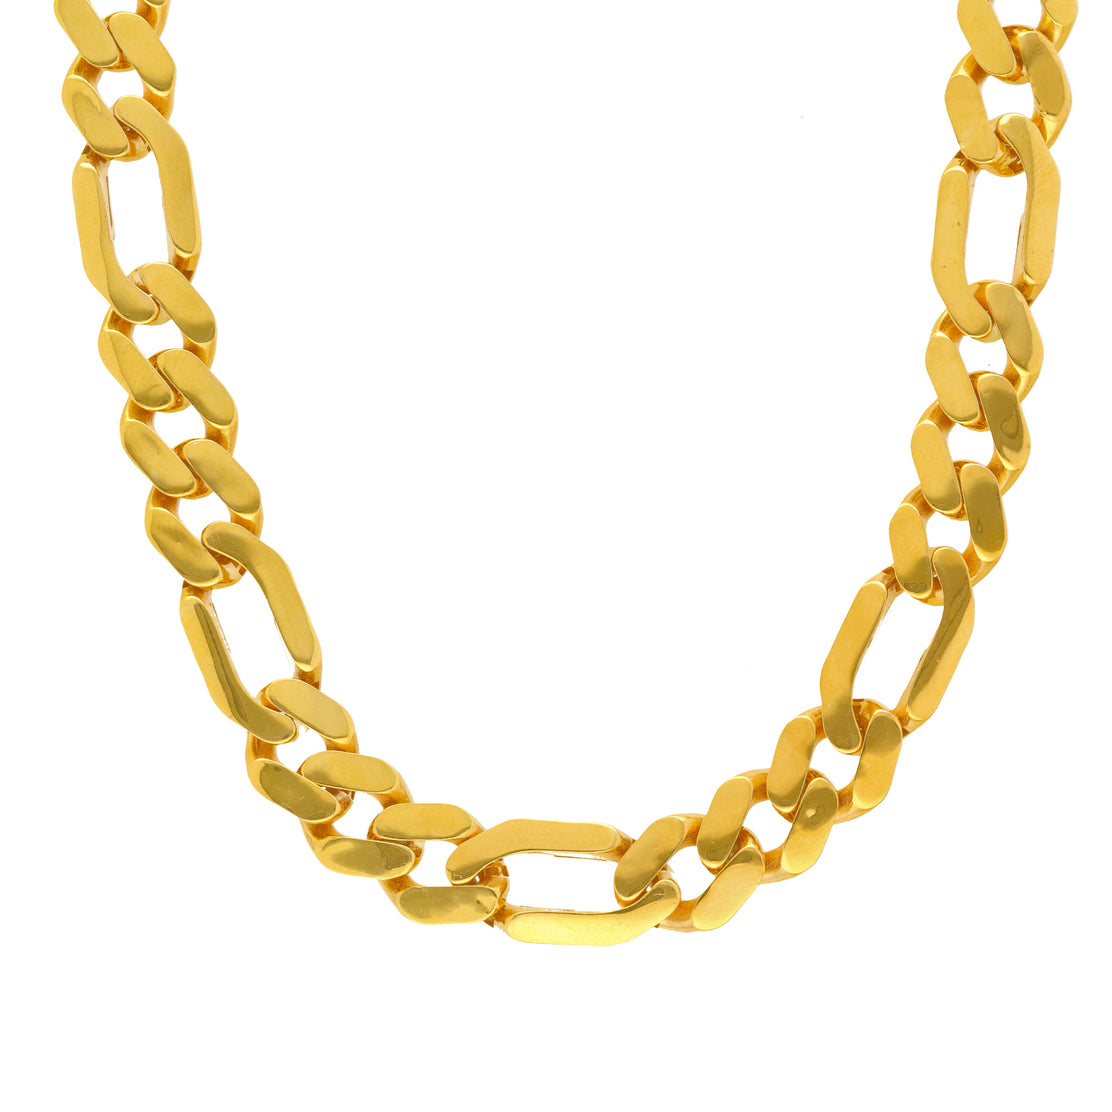 Buy Gorgeous 22kt Yellow Gold Solid Excellent Design Chain Online in India  